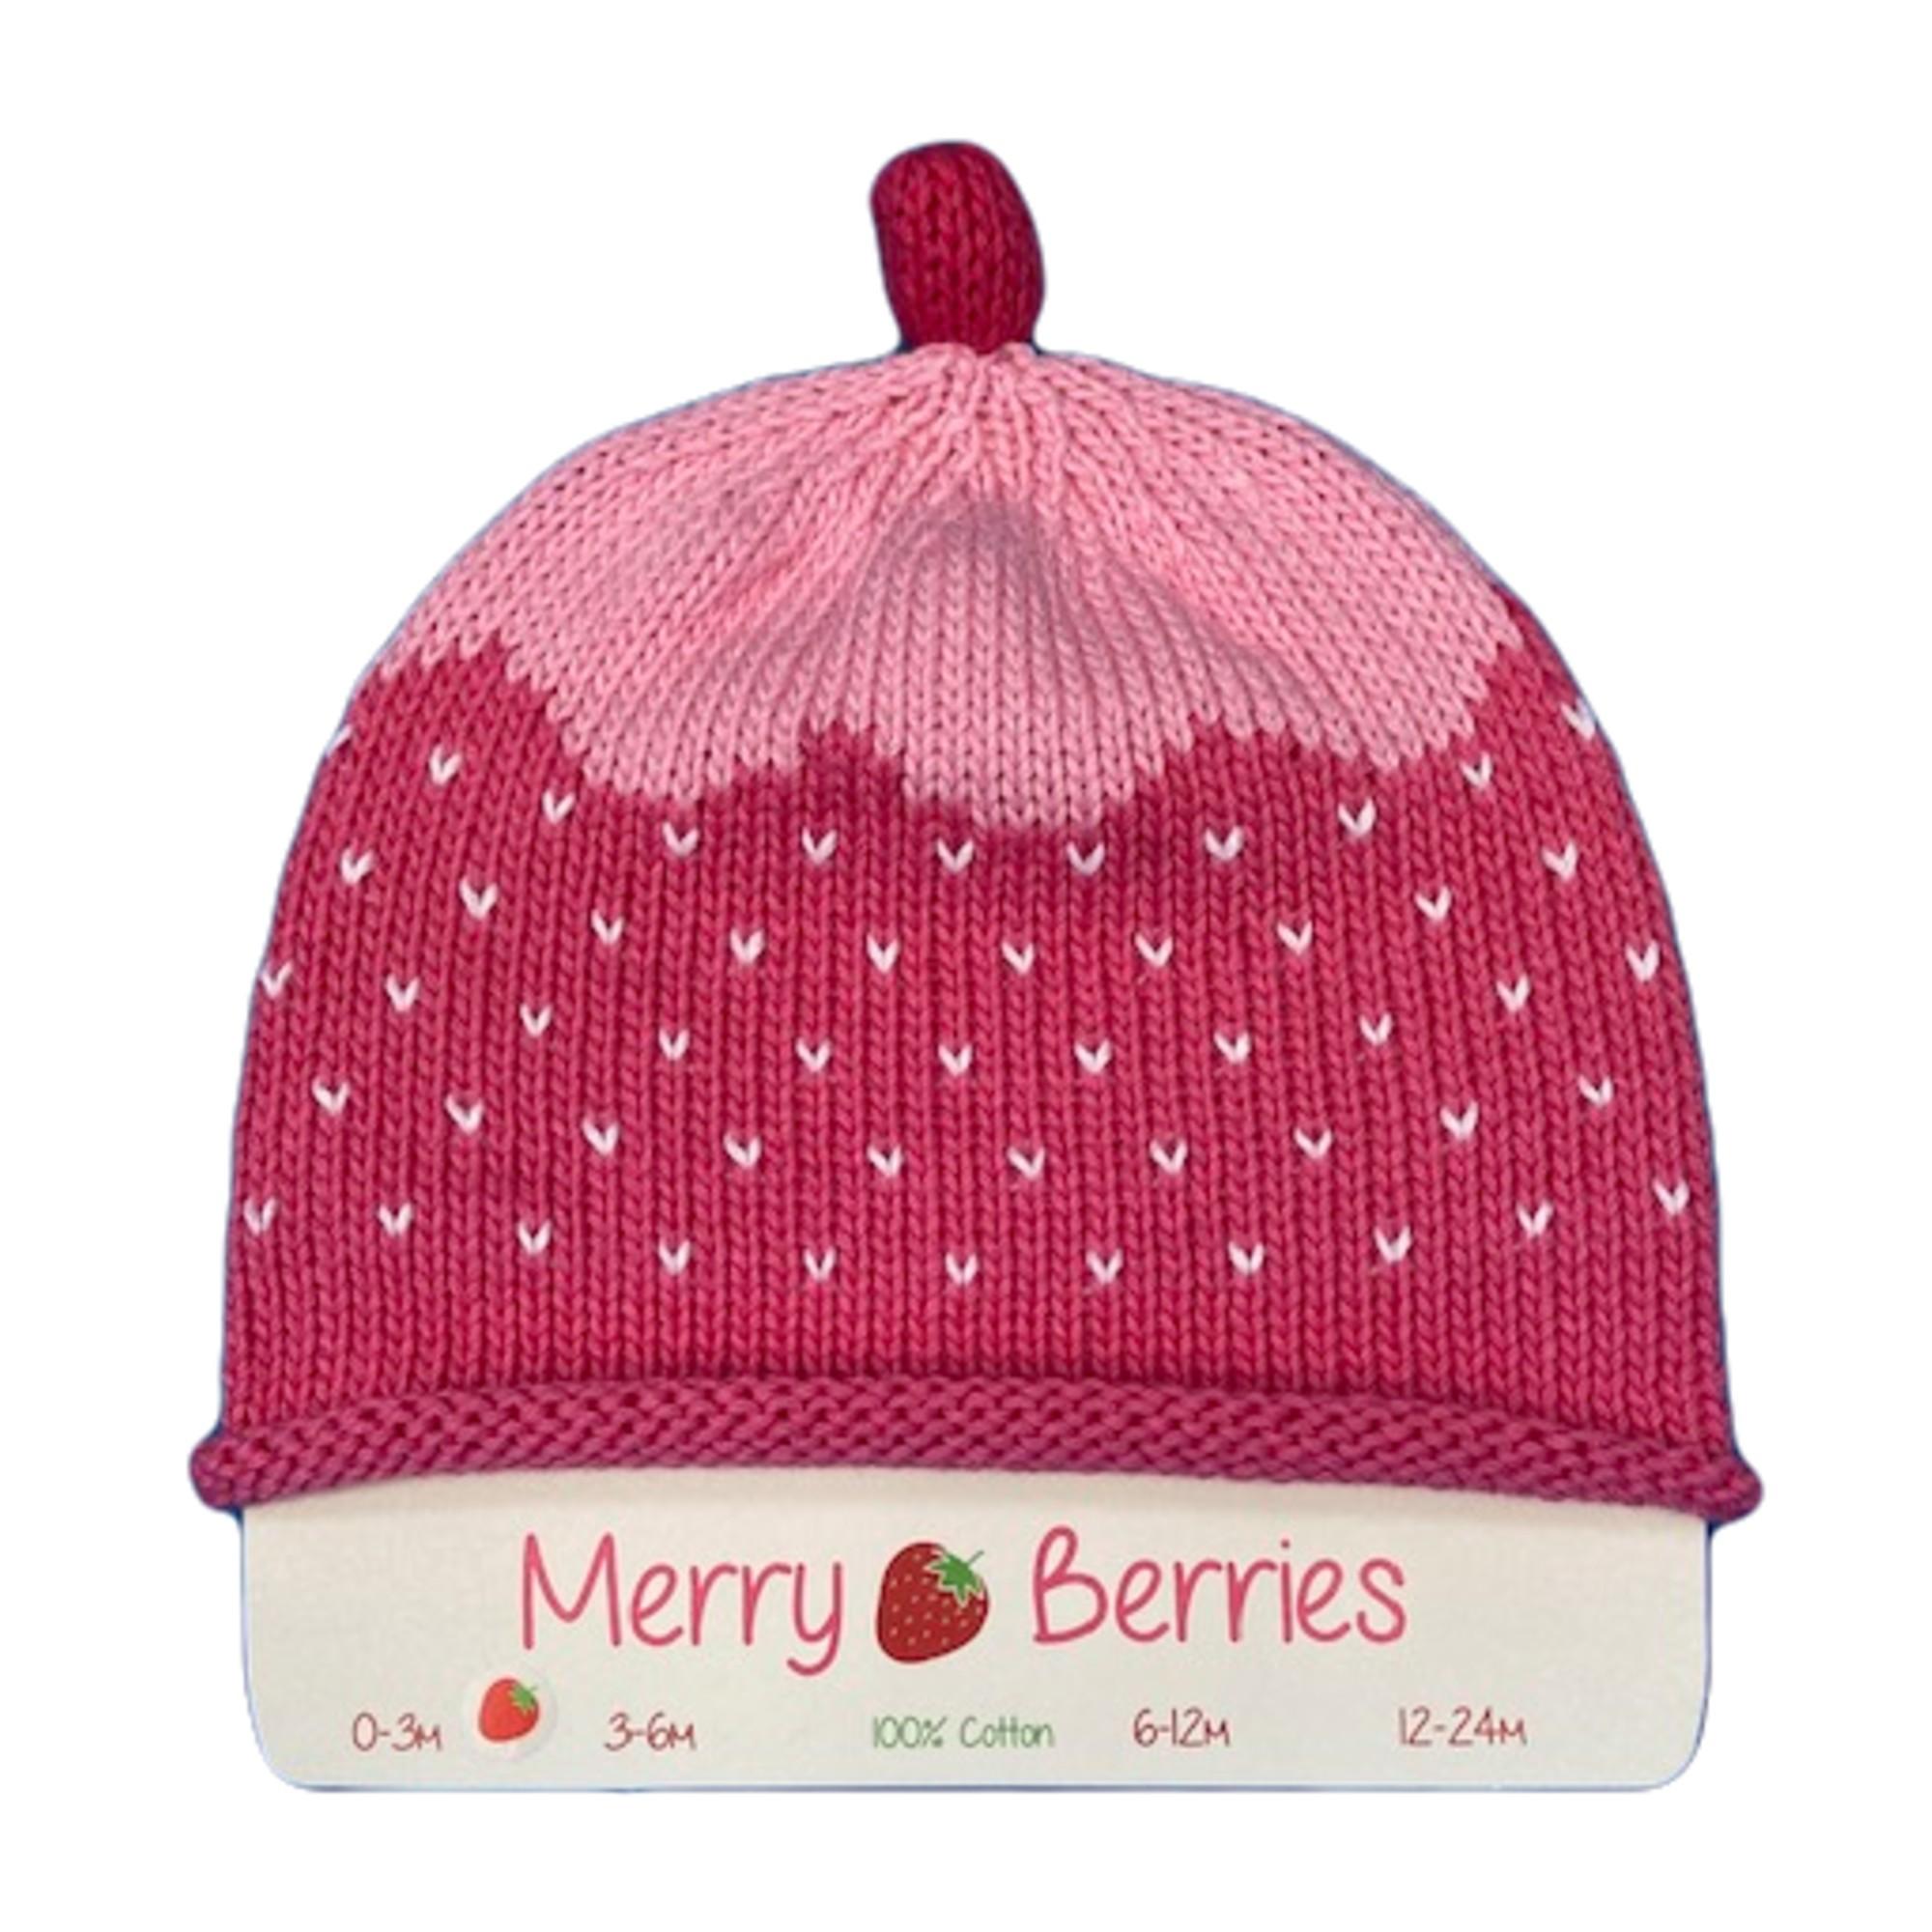 Merry Berries - Candy Cupcake Knitted baby Hat-0-24mths-Cotton